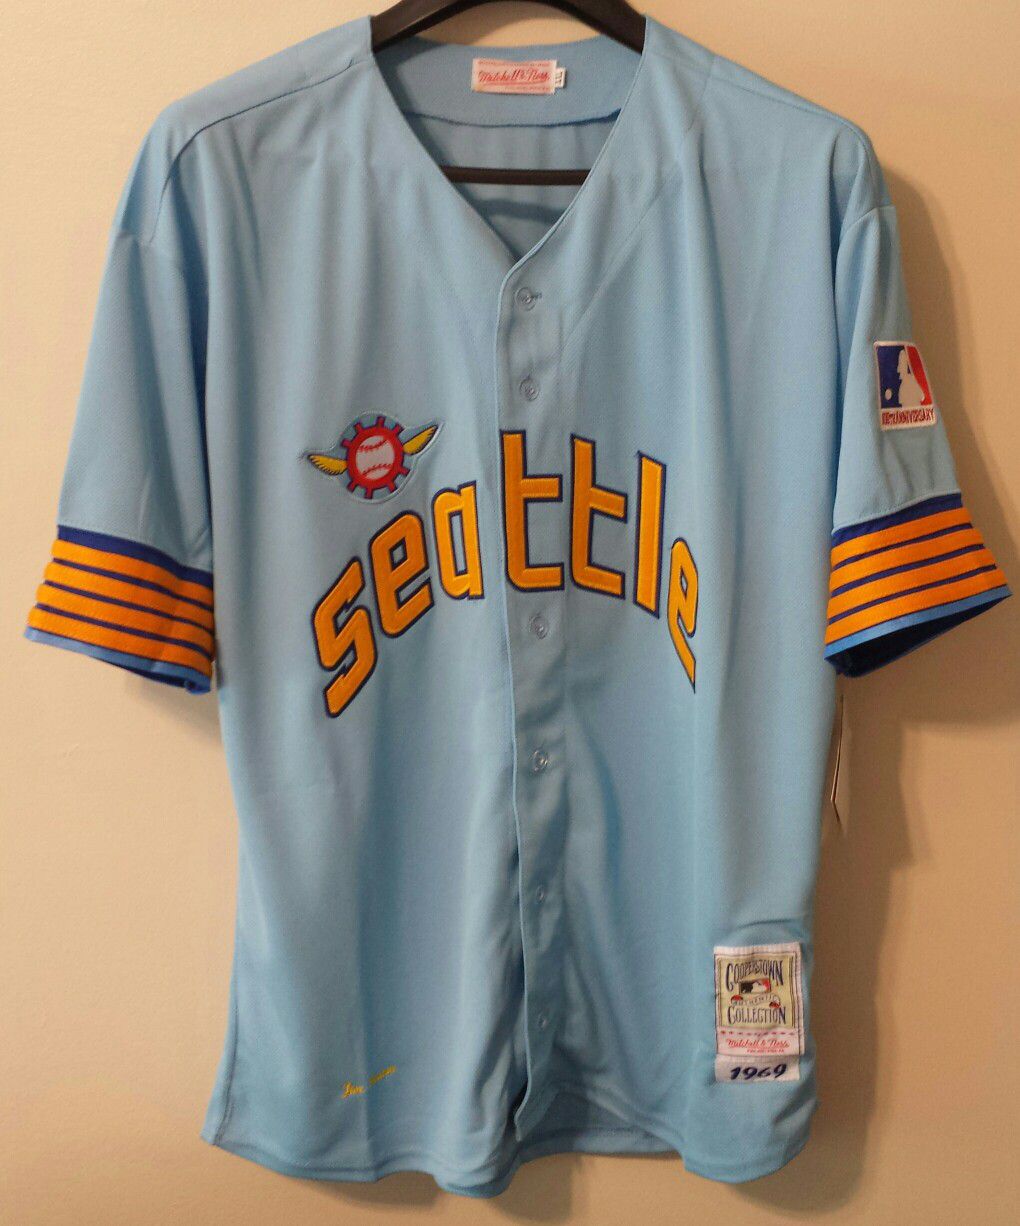 Jim Bouton 1969 Seattle Pilots Jersey for Sale in Queens, NY